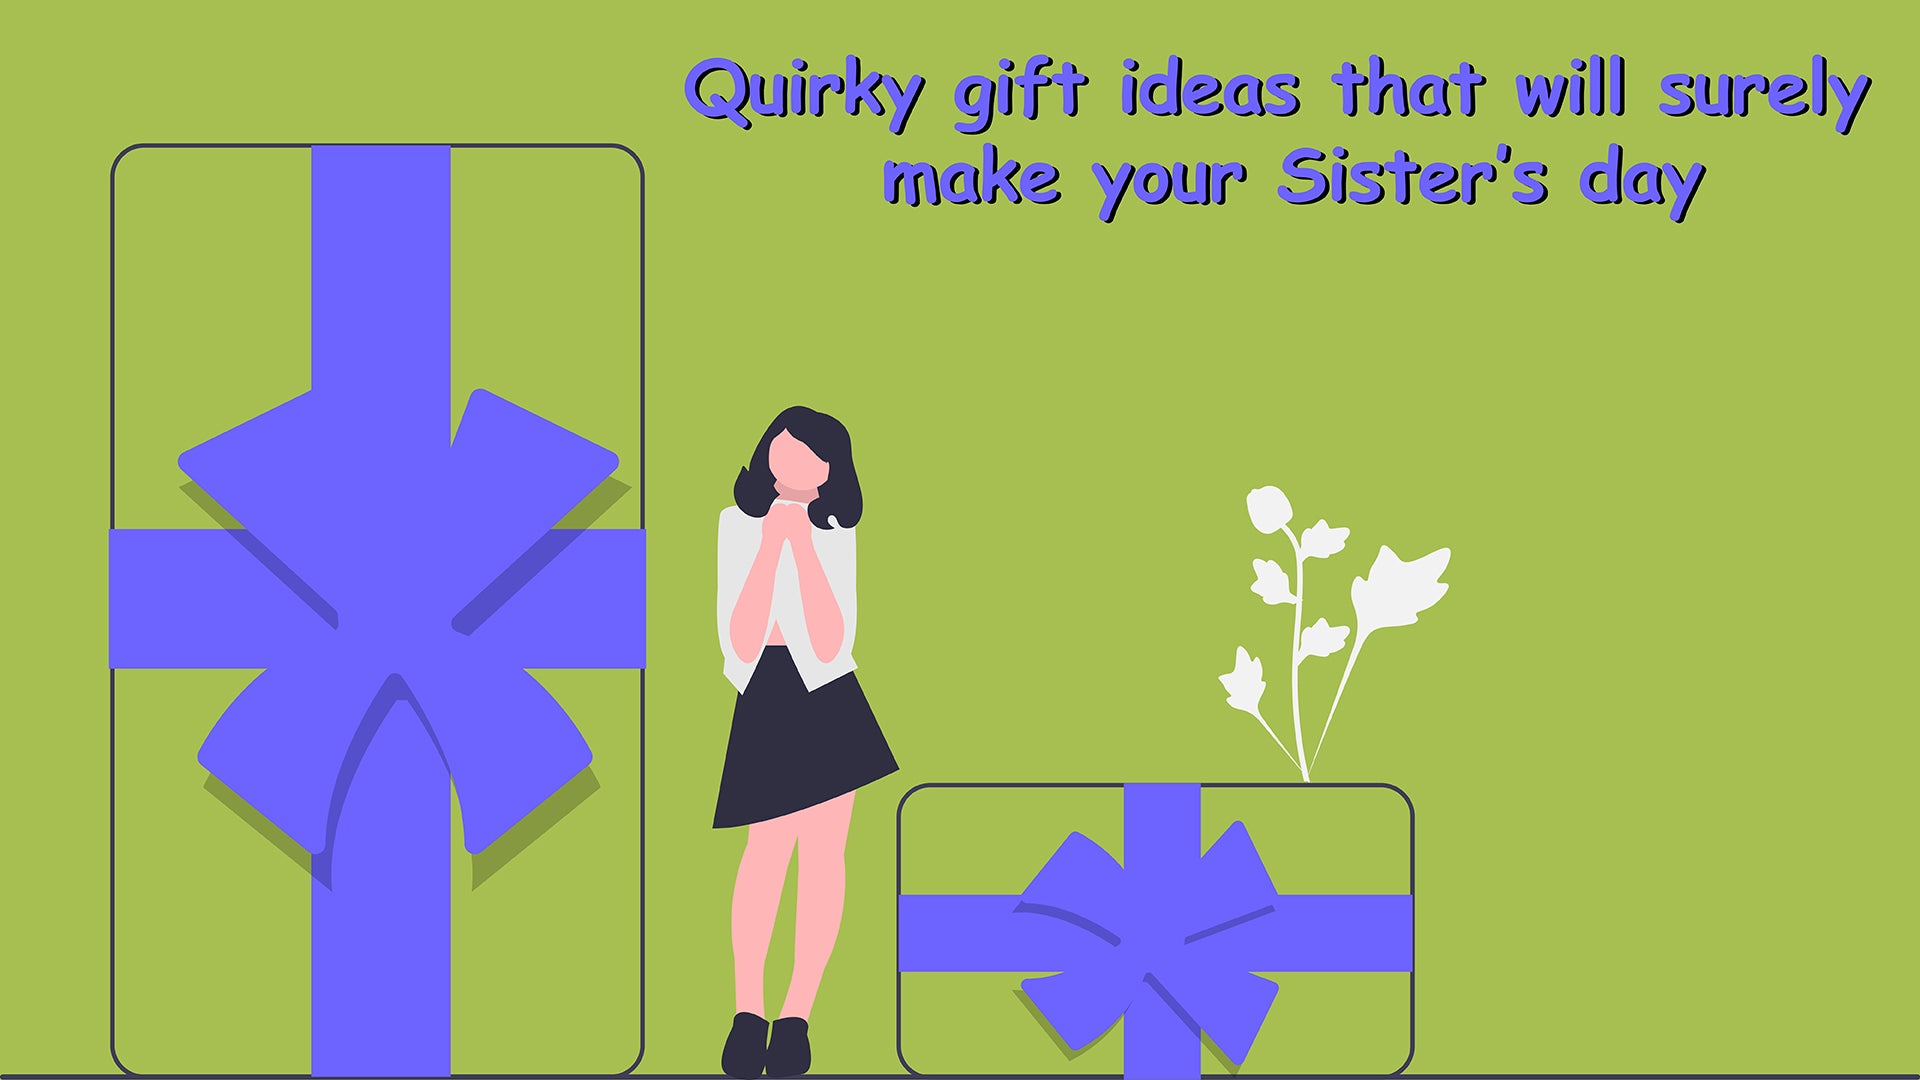 Big Sister Gift Ideas | What We Gave Our 4-Year-Old - Small Stuff Counts